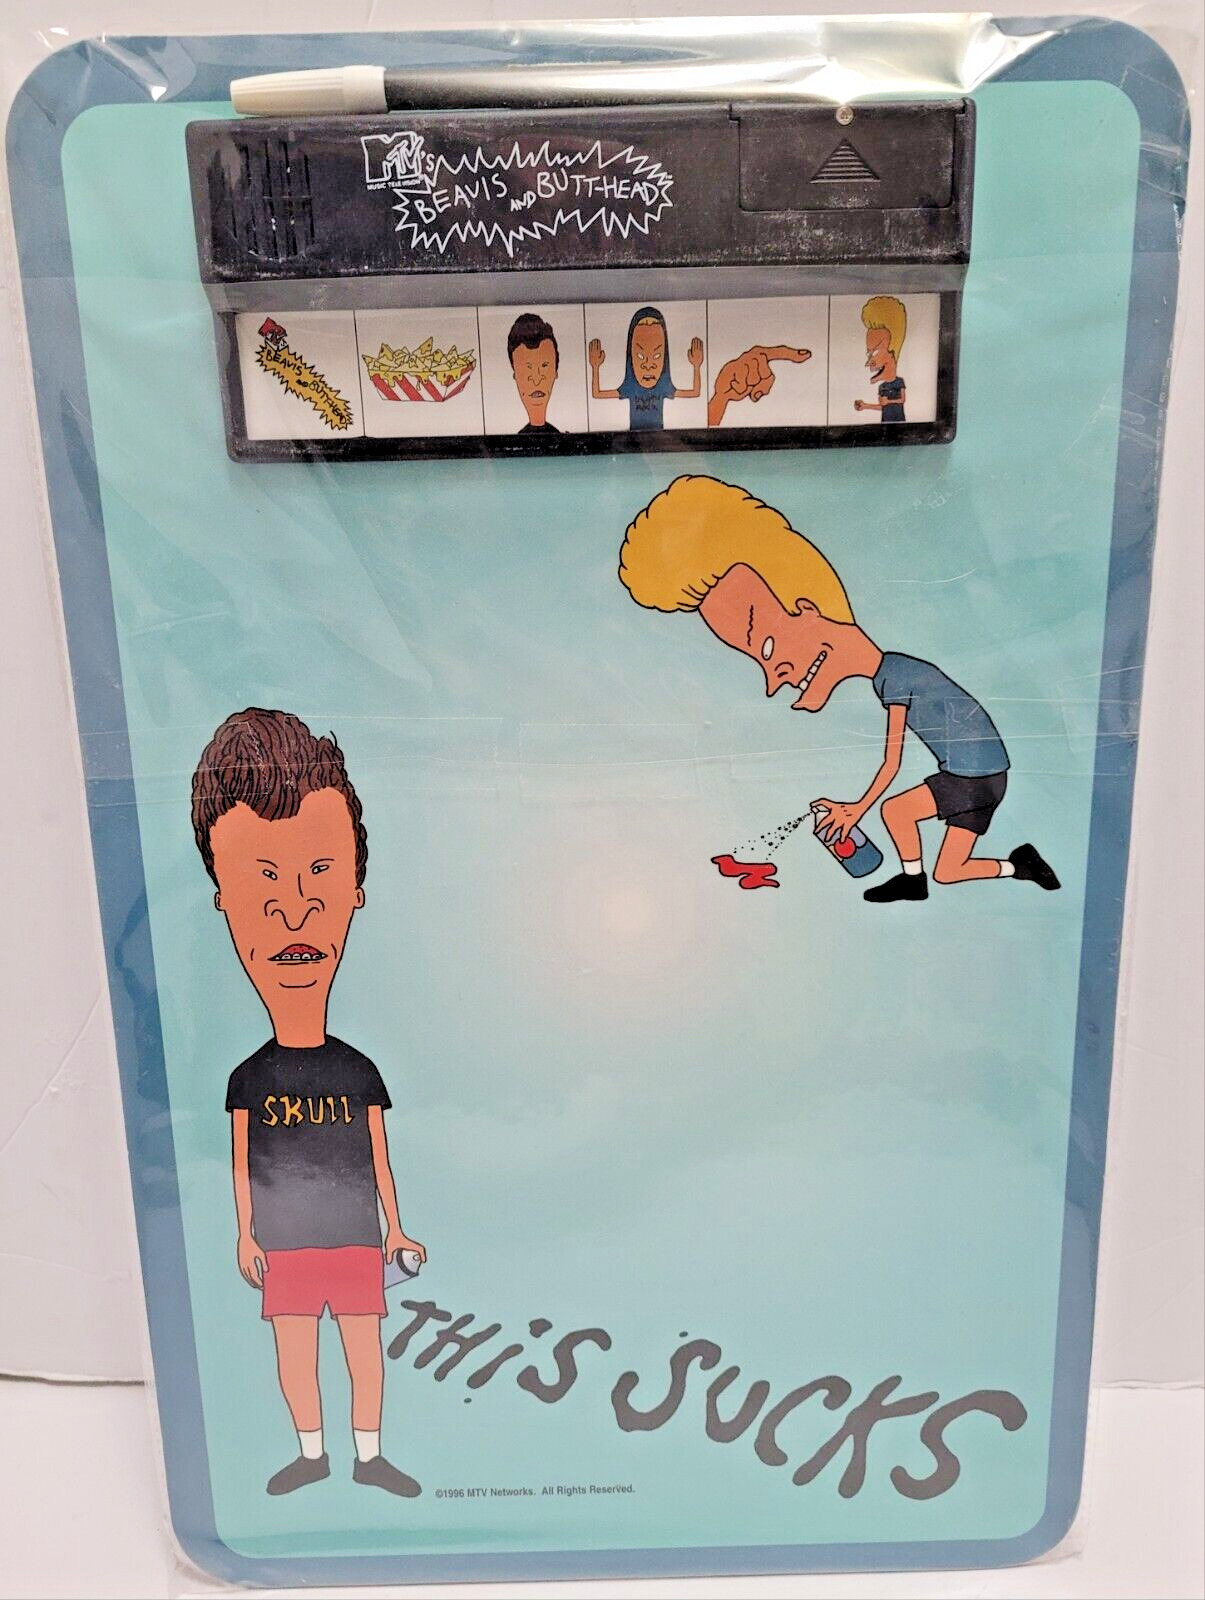 BEAVIS AND BUTTHEAD SOUND EFFECTS BOARD